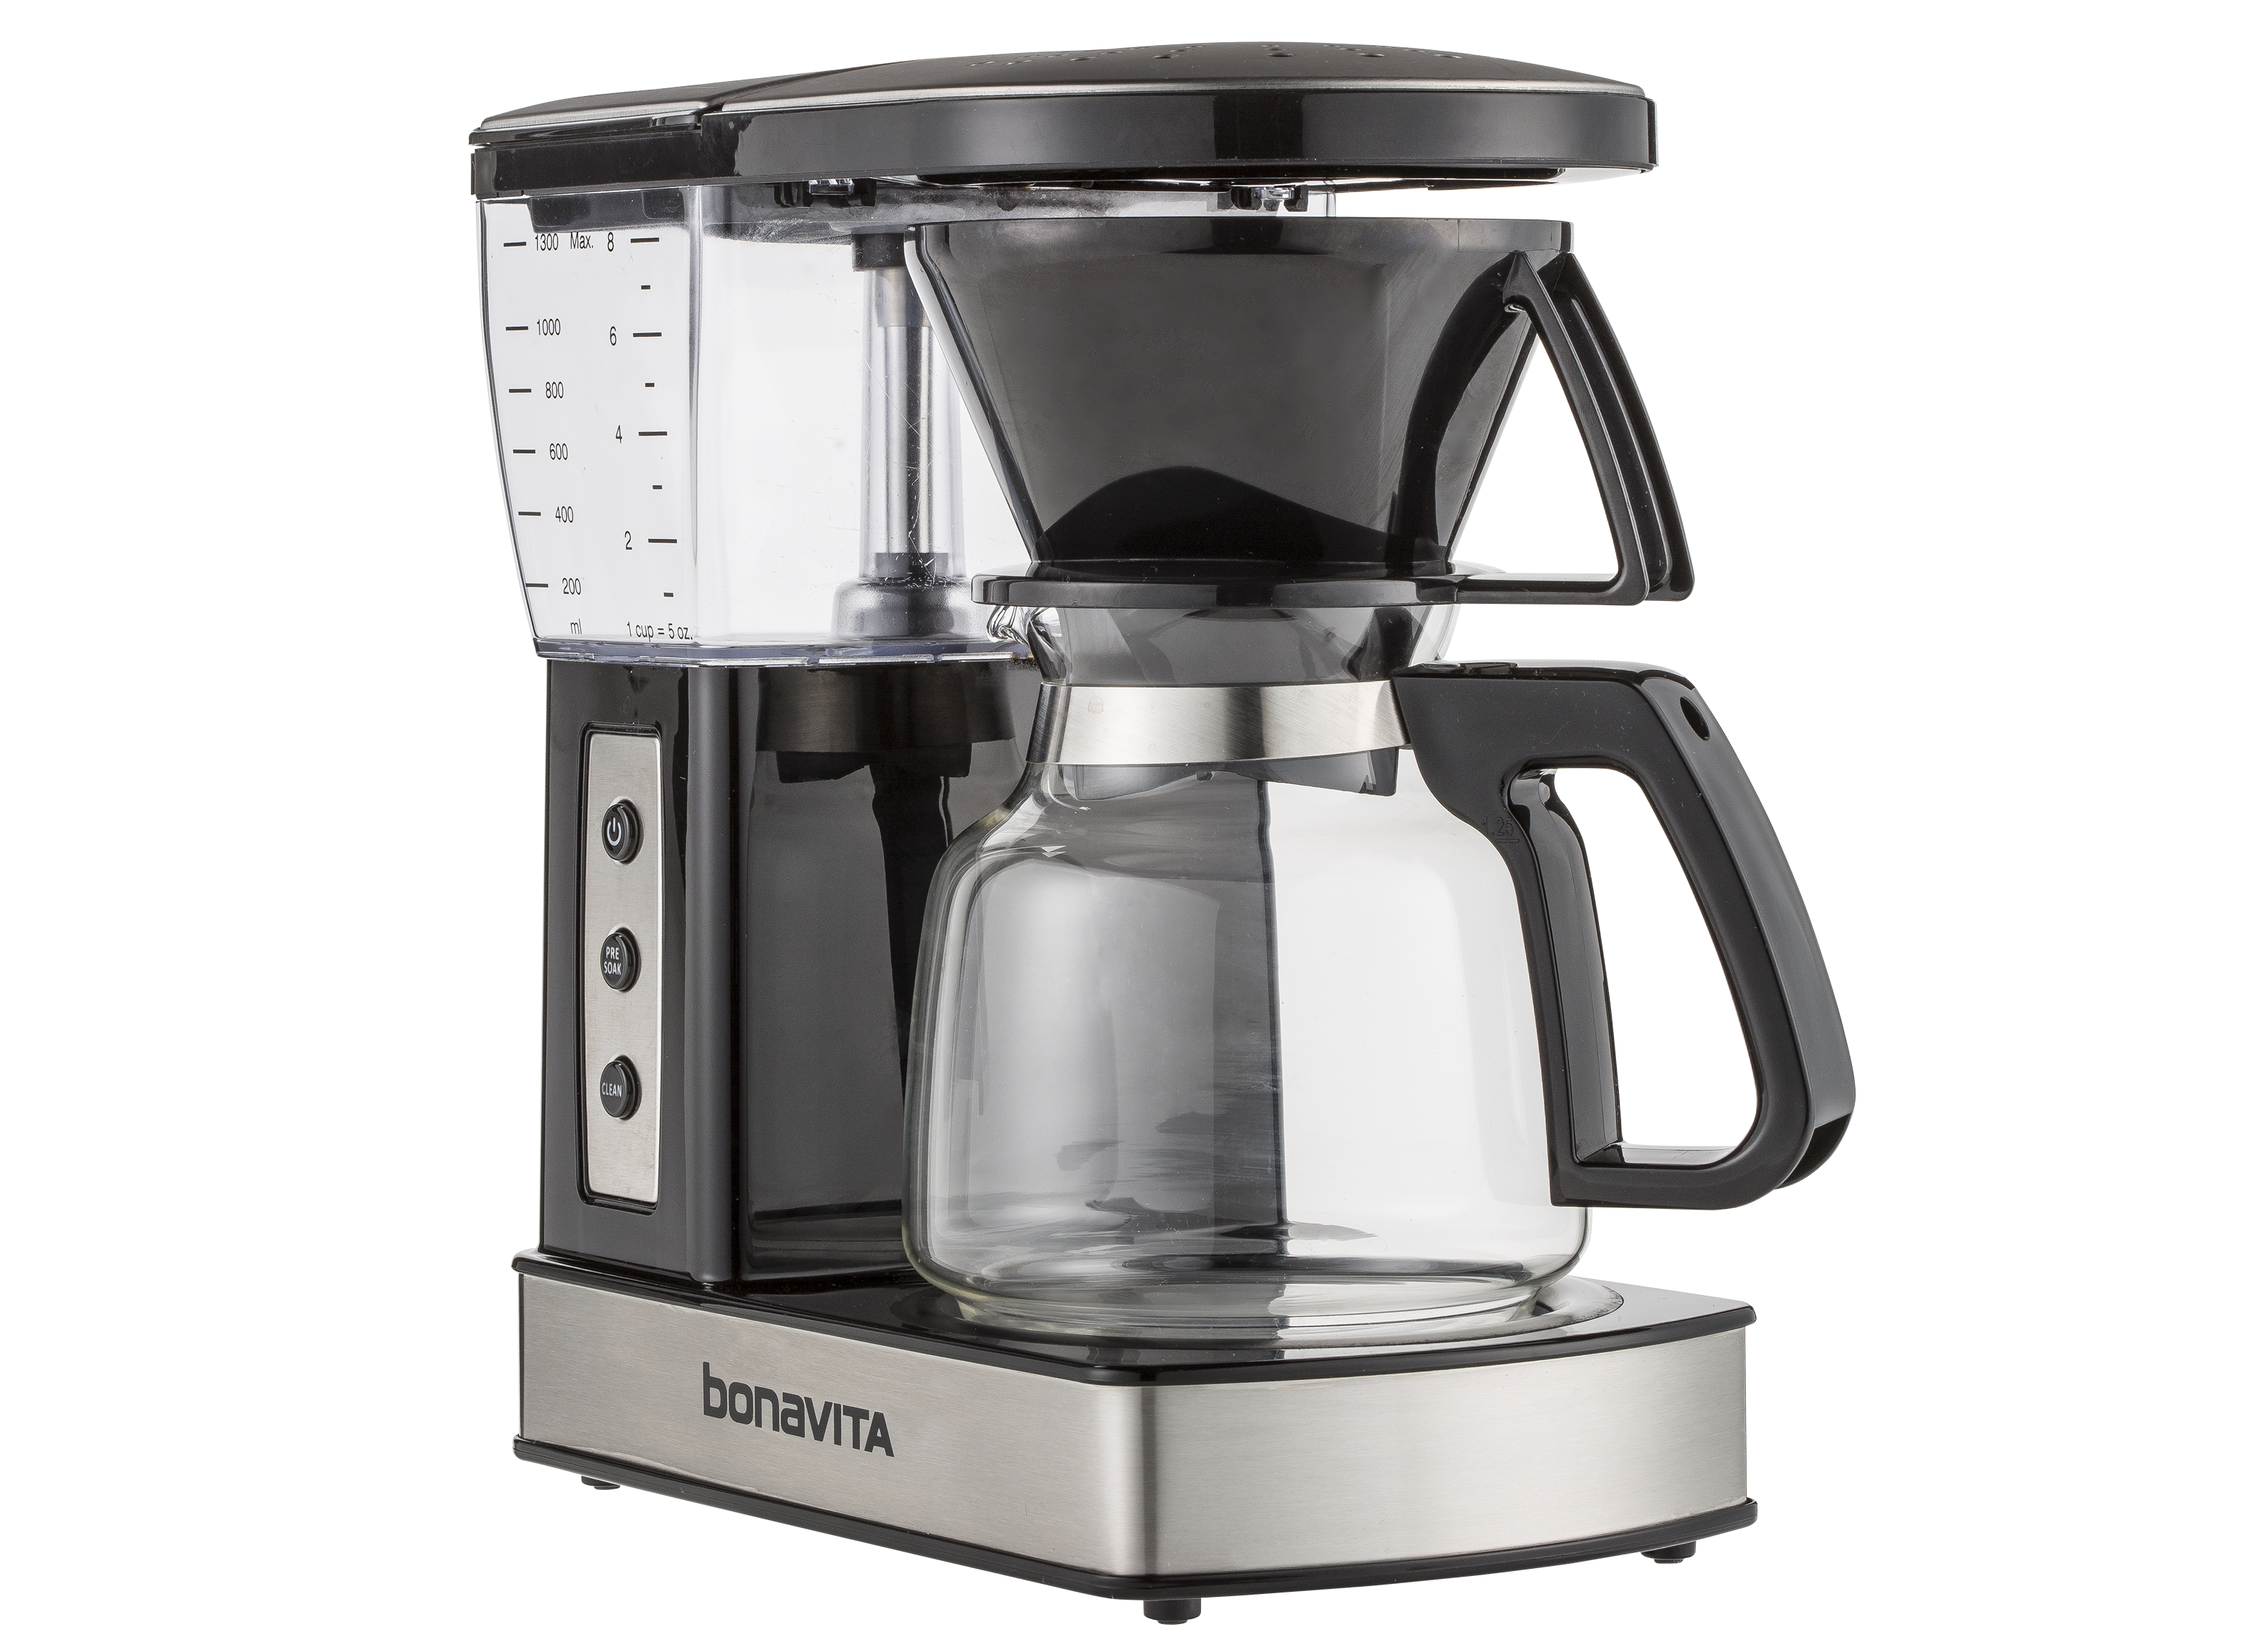 https://crdms.images.consumerreports.org/prod/products/cr/models/388688-coffeemakers-bonavita-bv01002us.png